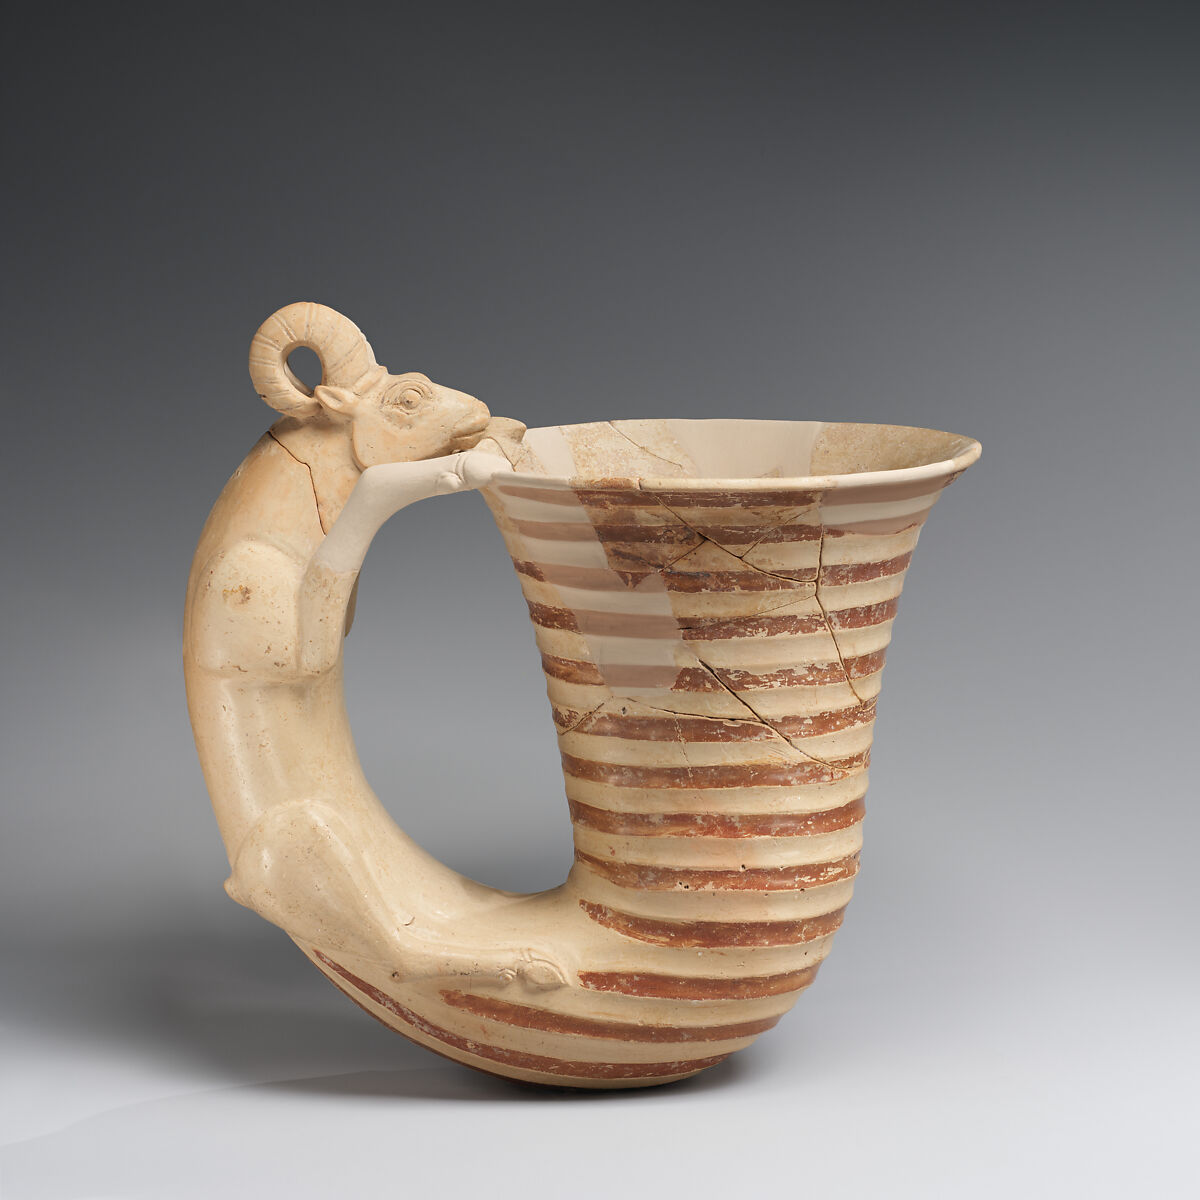 Vessel with a handle in the form of a ram, Ceramic, paint, Iran 